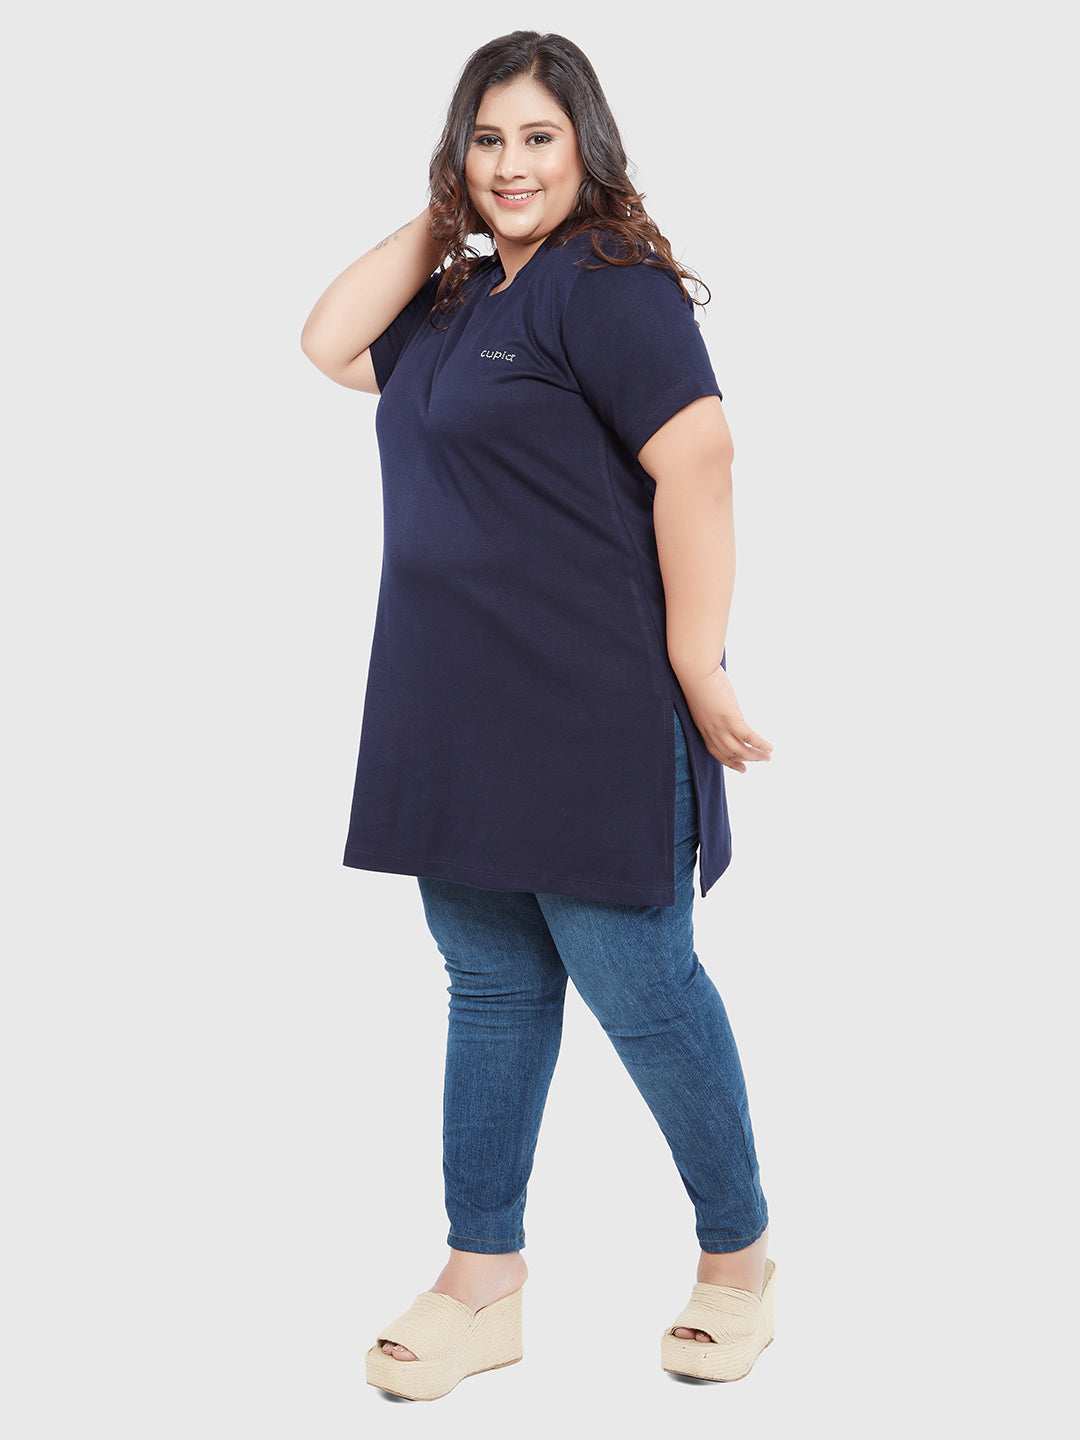 Plus Size Half Sleeves Long Top For Women - Navy Blue